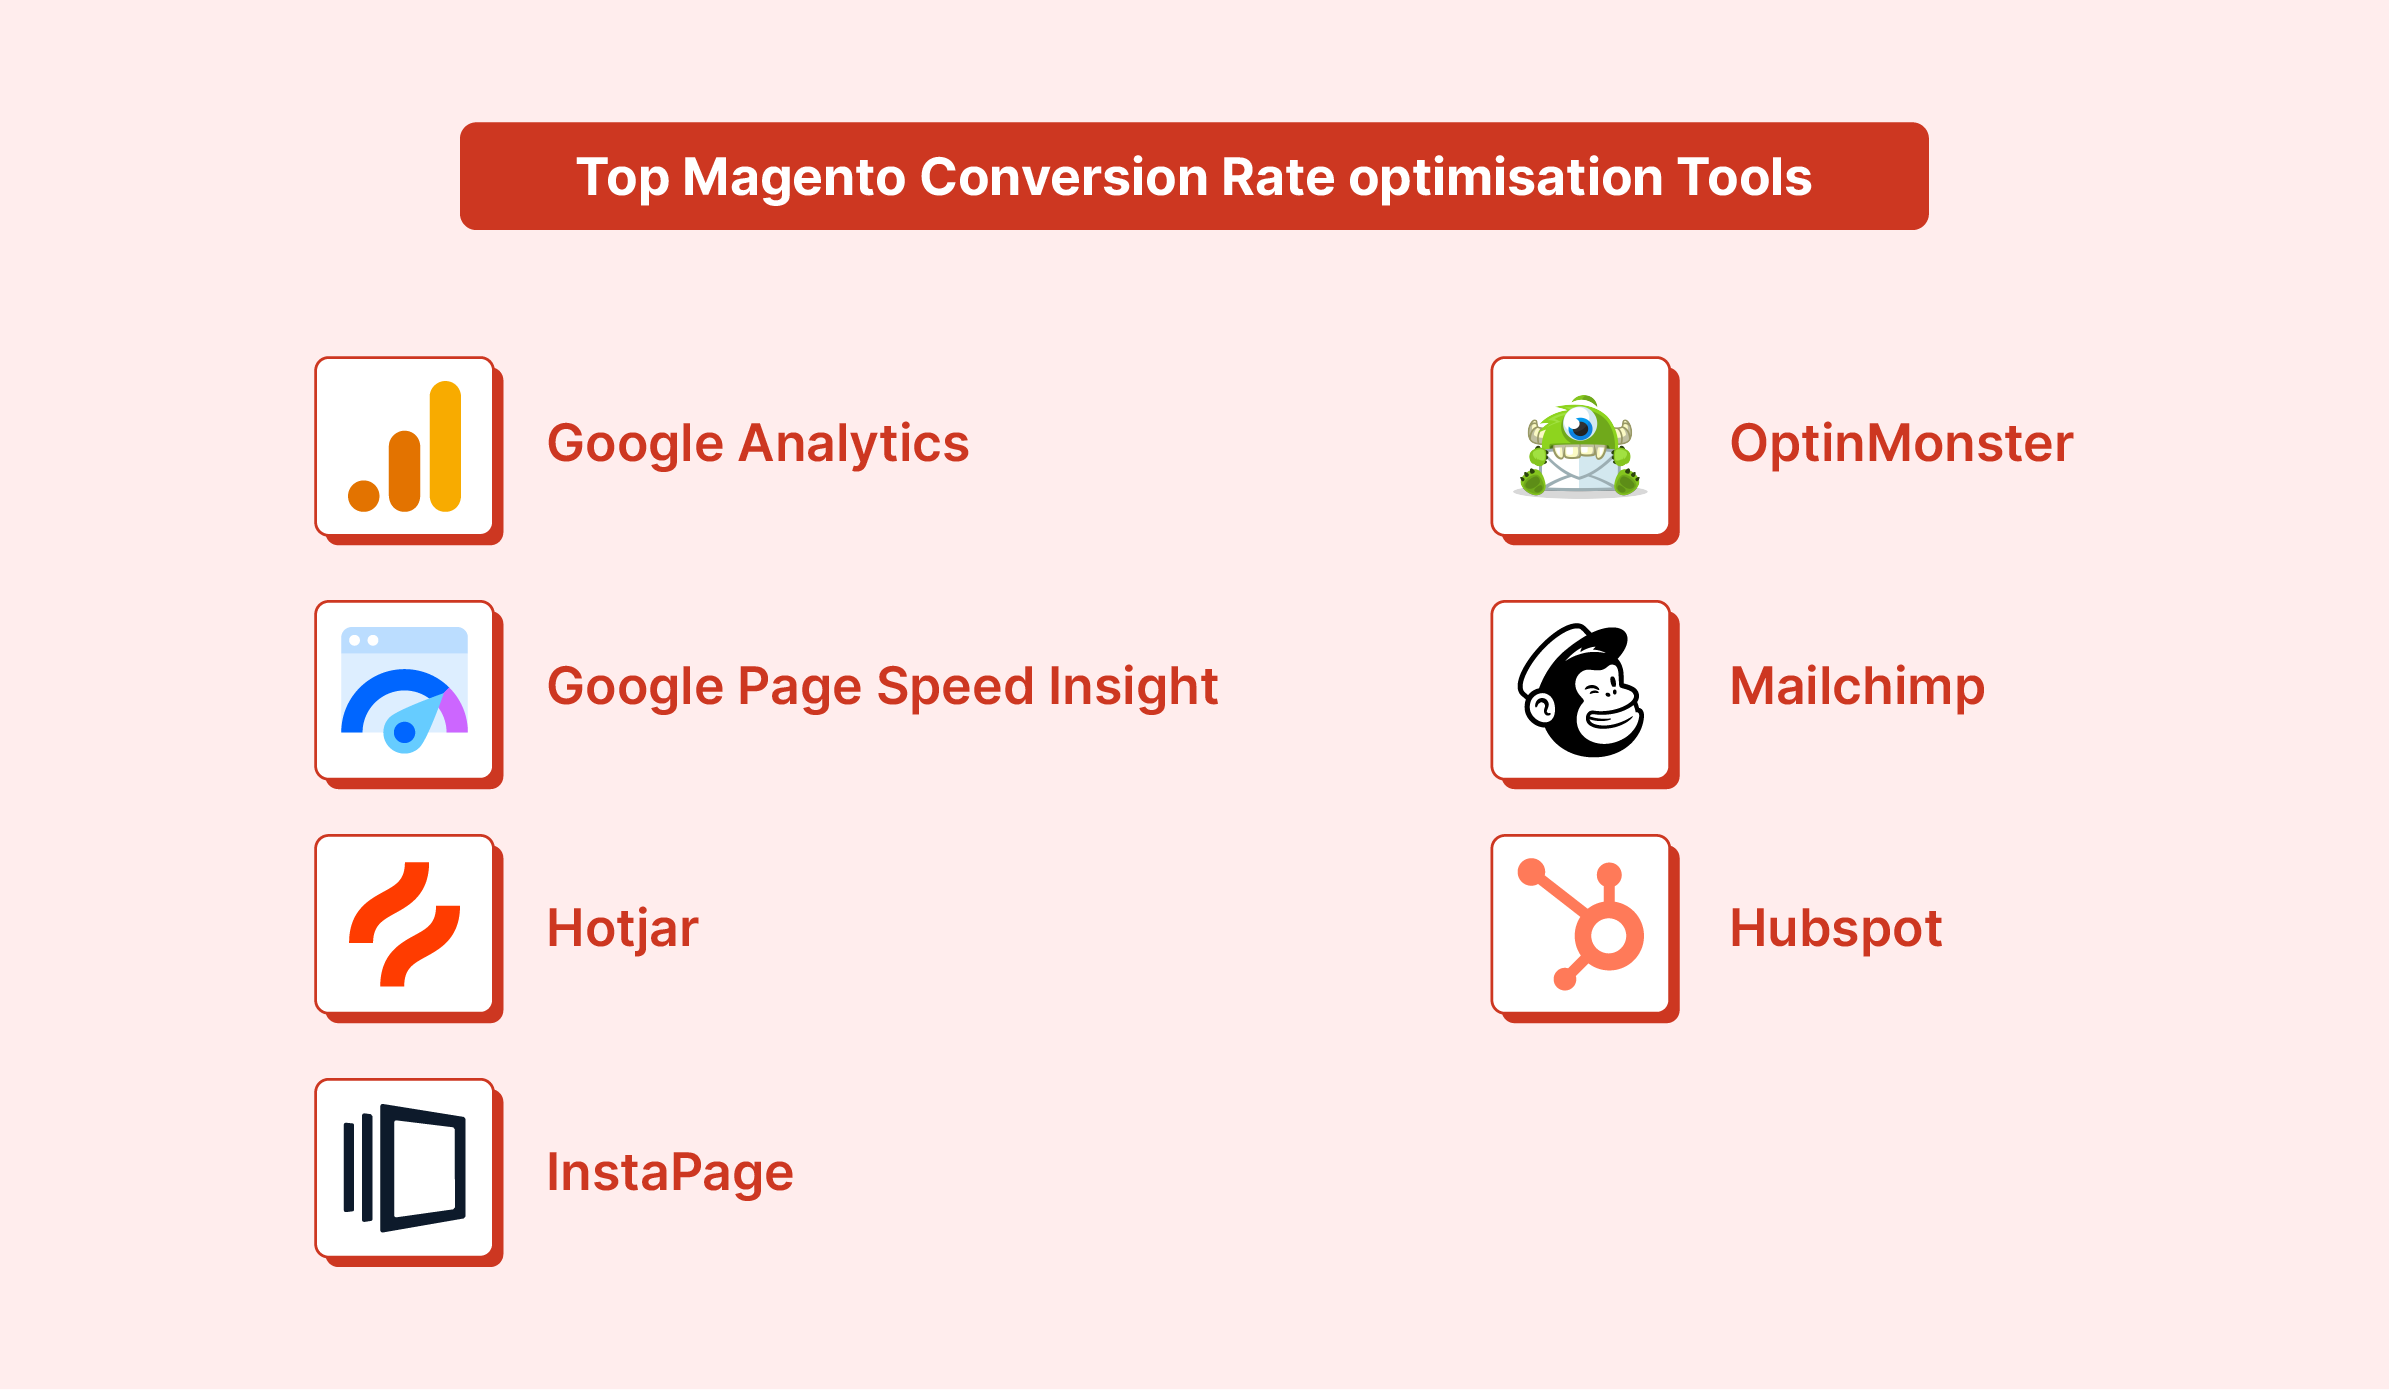 Essential tools for optimizing Magento store conversions